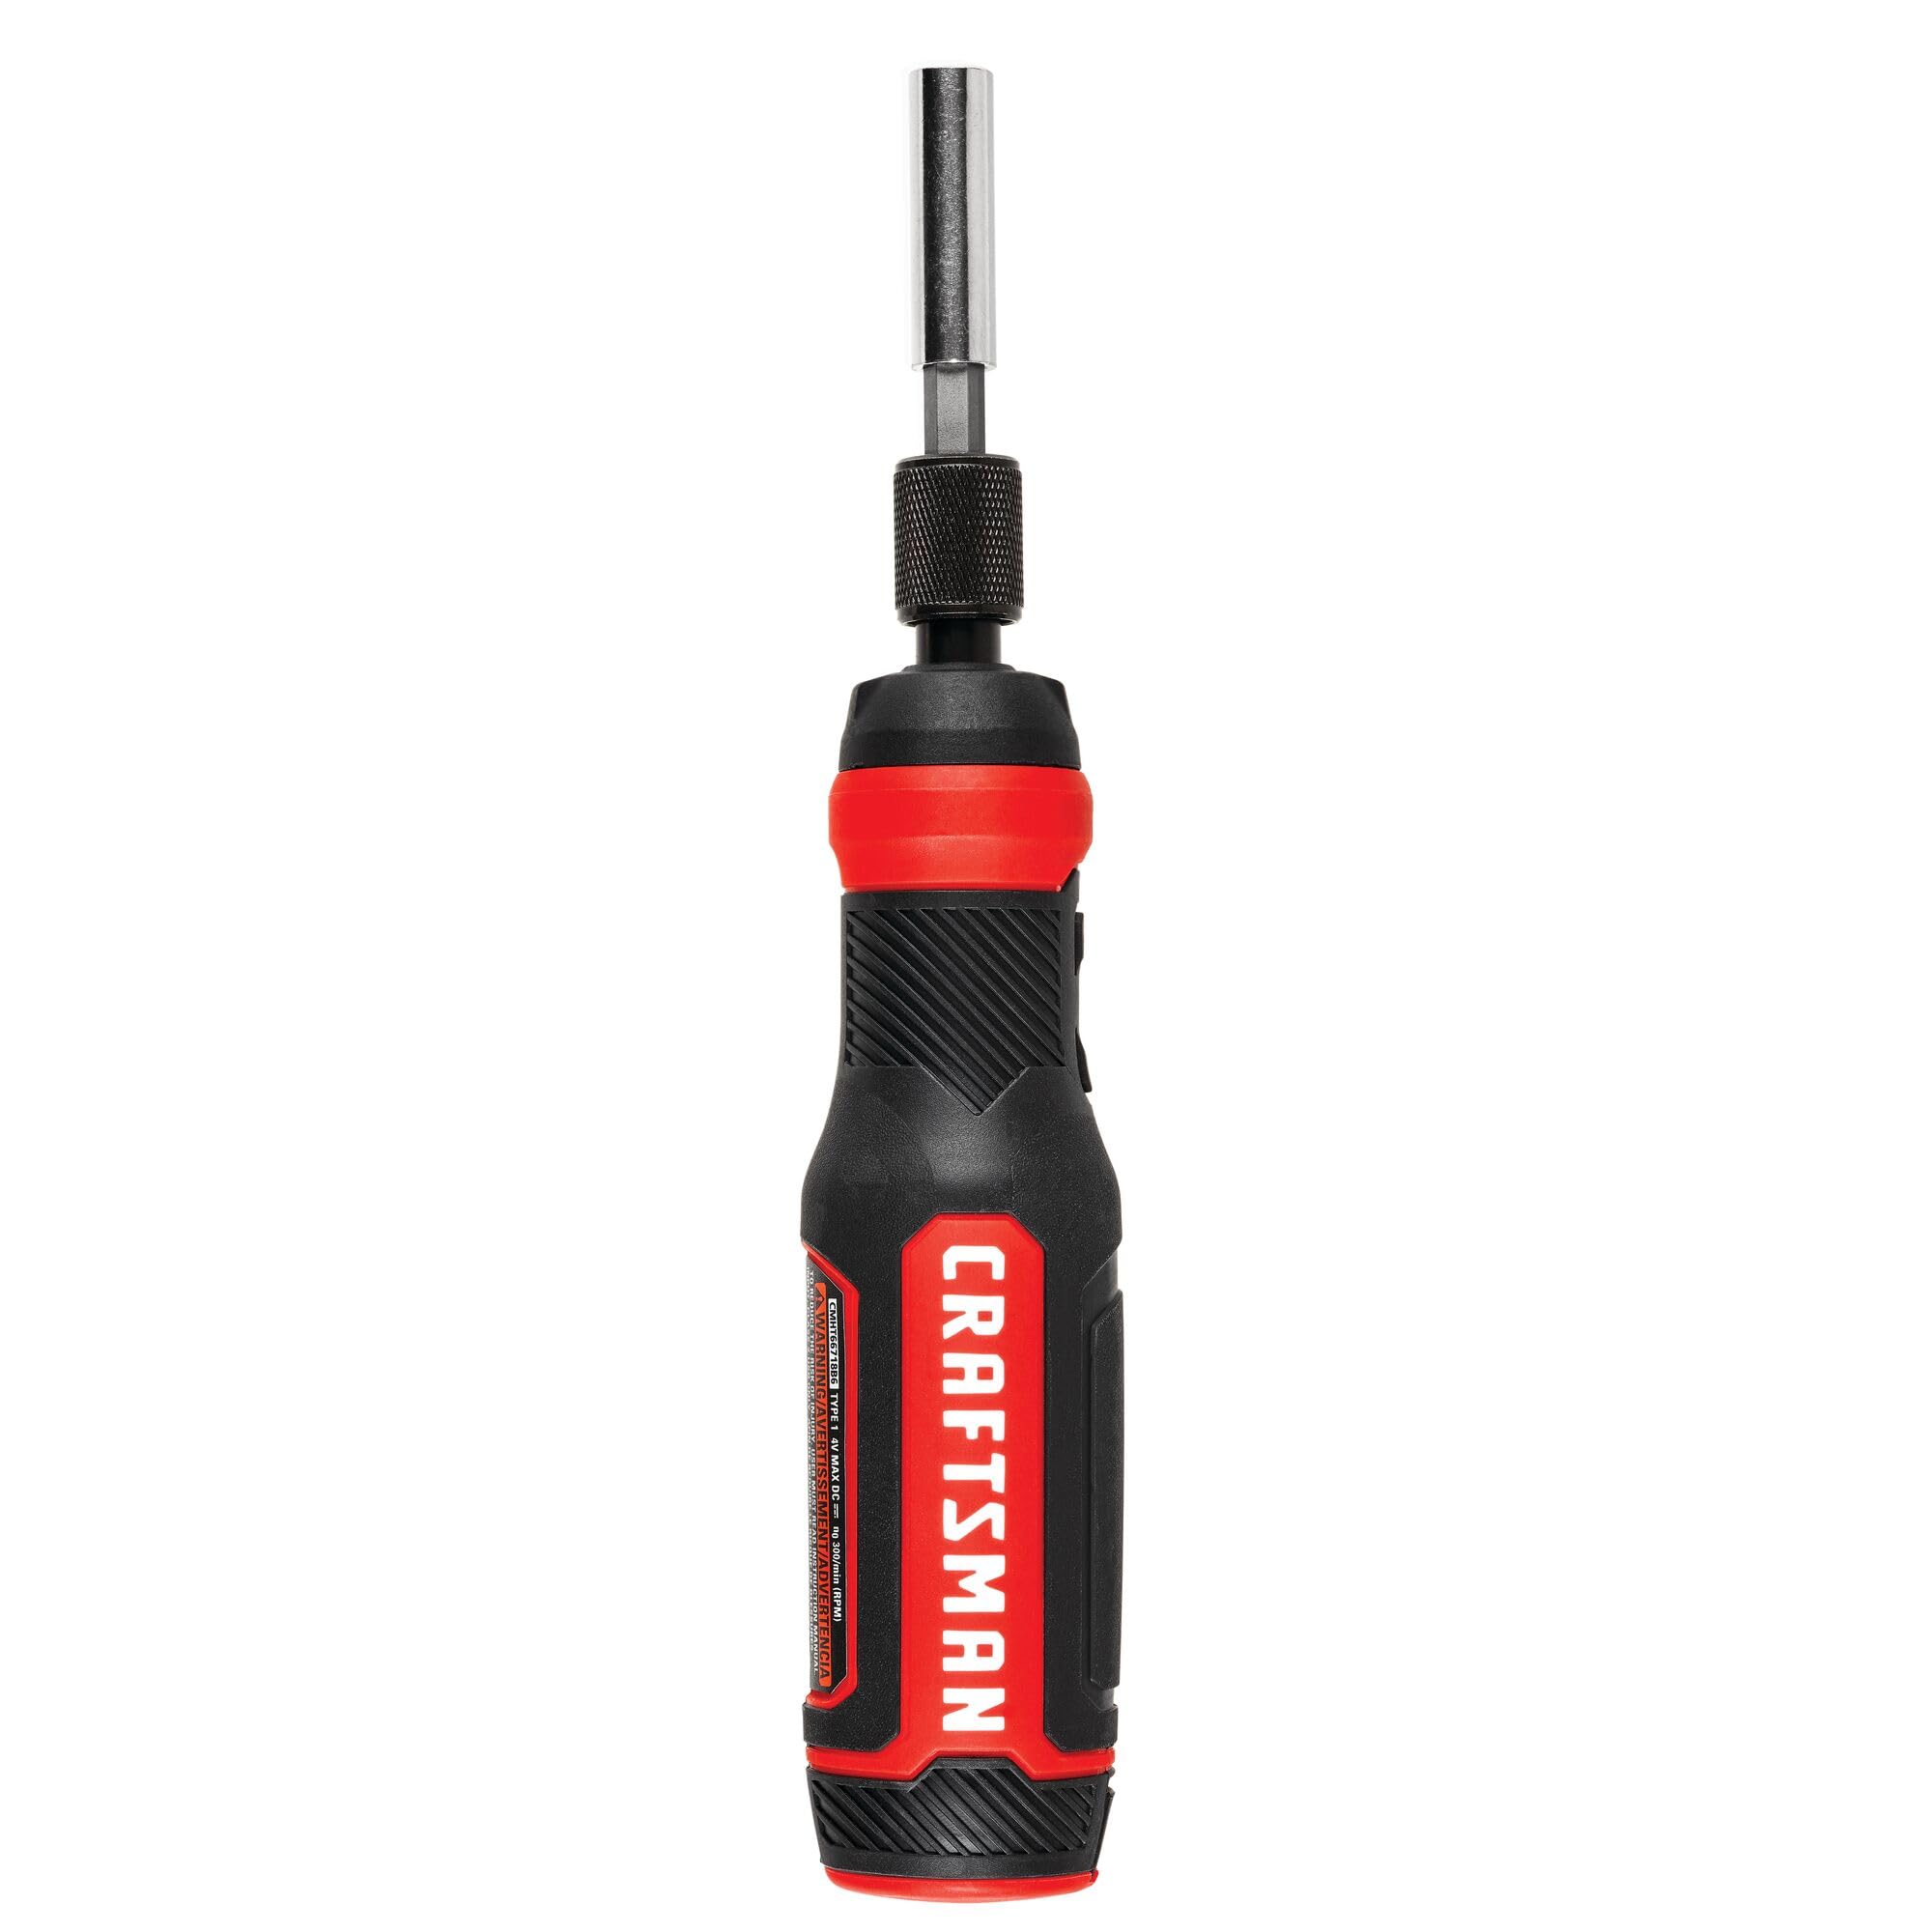 CRAFTSMAN 4V Electric Screwdriver Set w/ Charger & Battery (CMHT66718B20) $31.98 + Free Shipping w/ Prime or on $35+